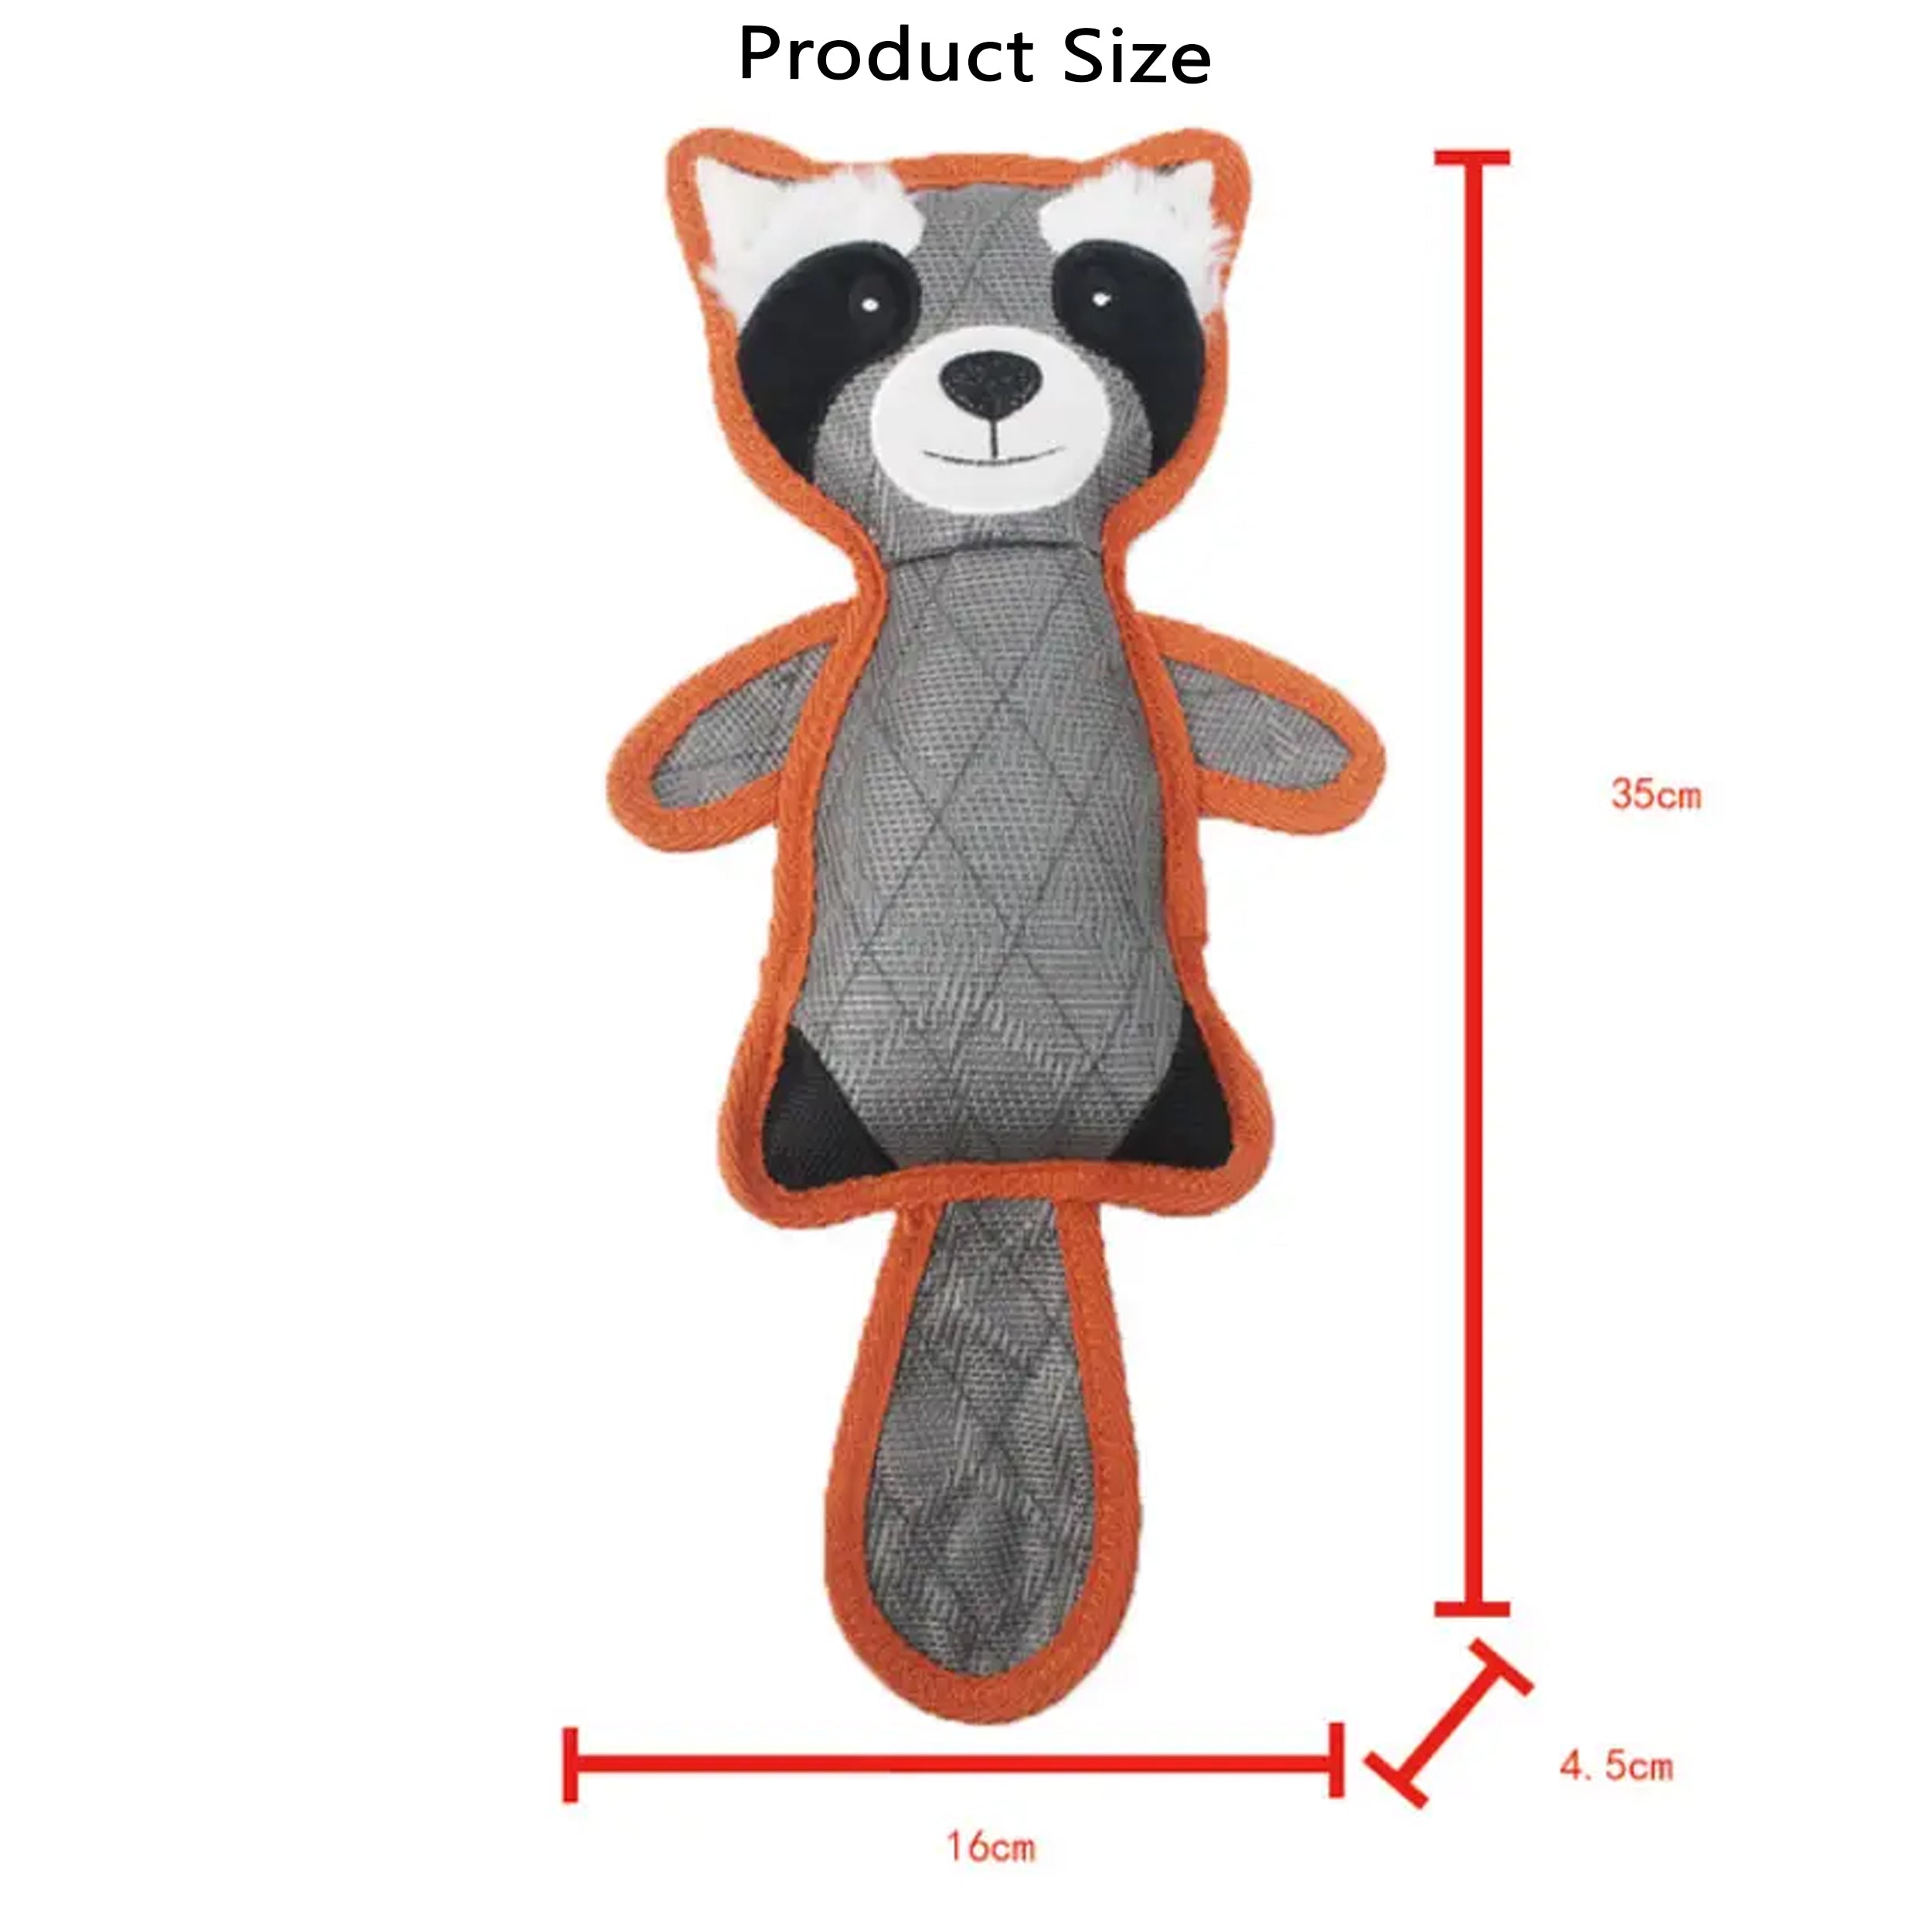 Fox Net Animal Shape Squeaky Pet Toy for Playful Entertainment